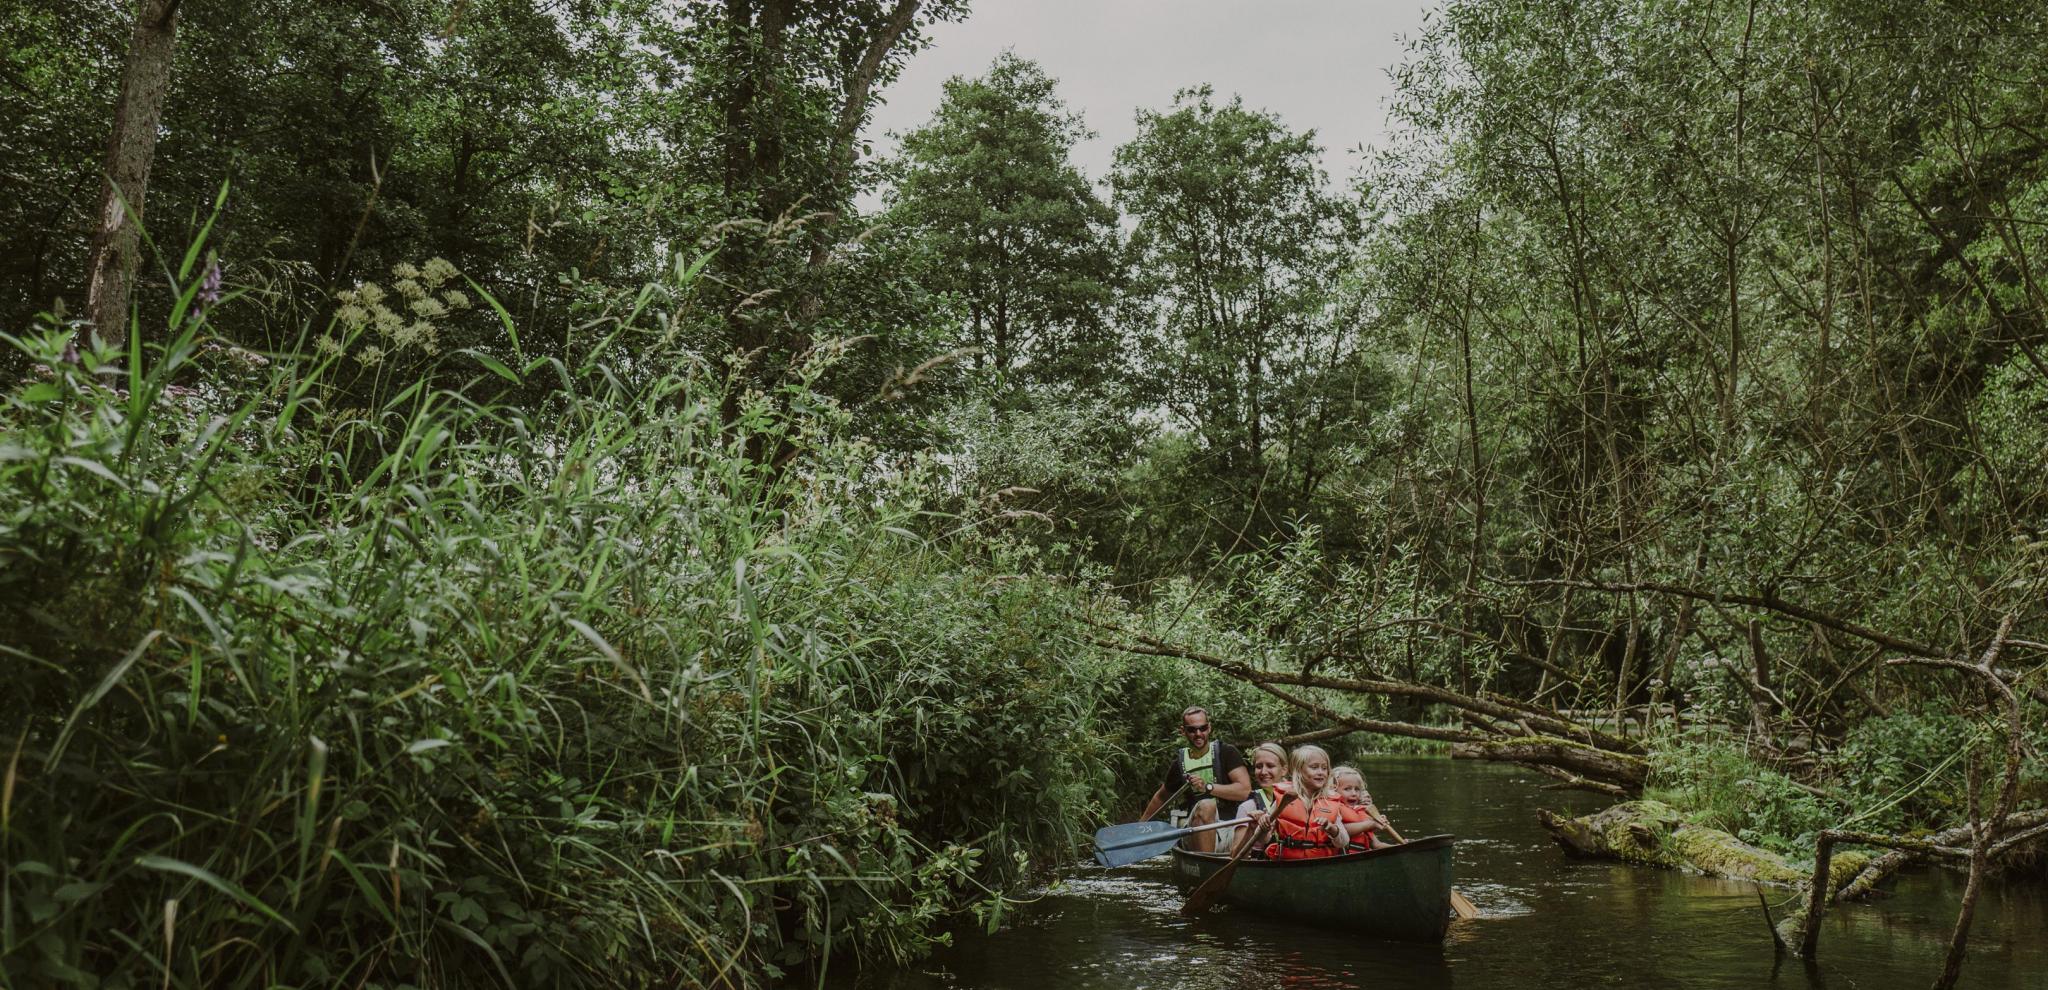 A family canoeing through a stream surrounded by lush greenery at Rönne Å